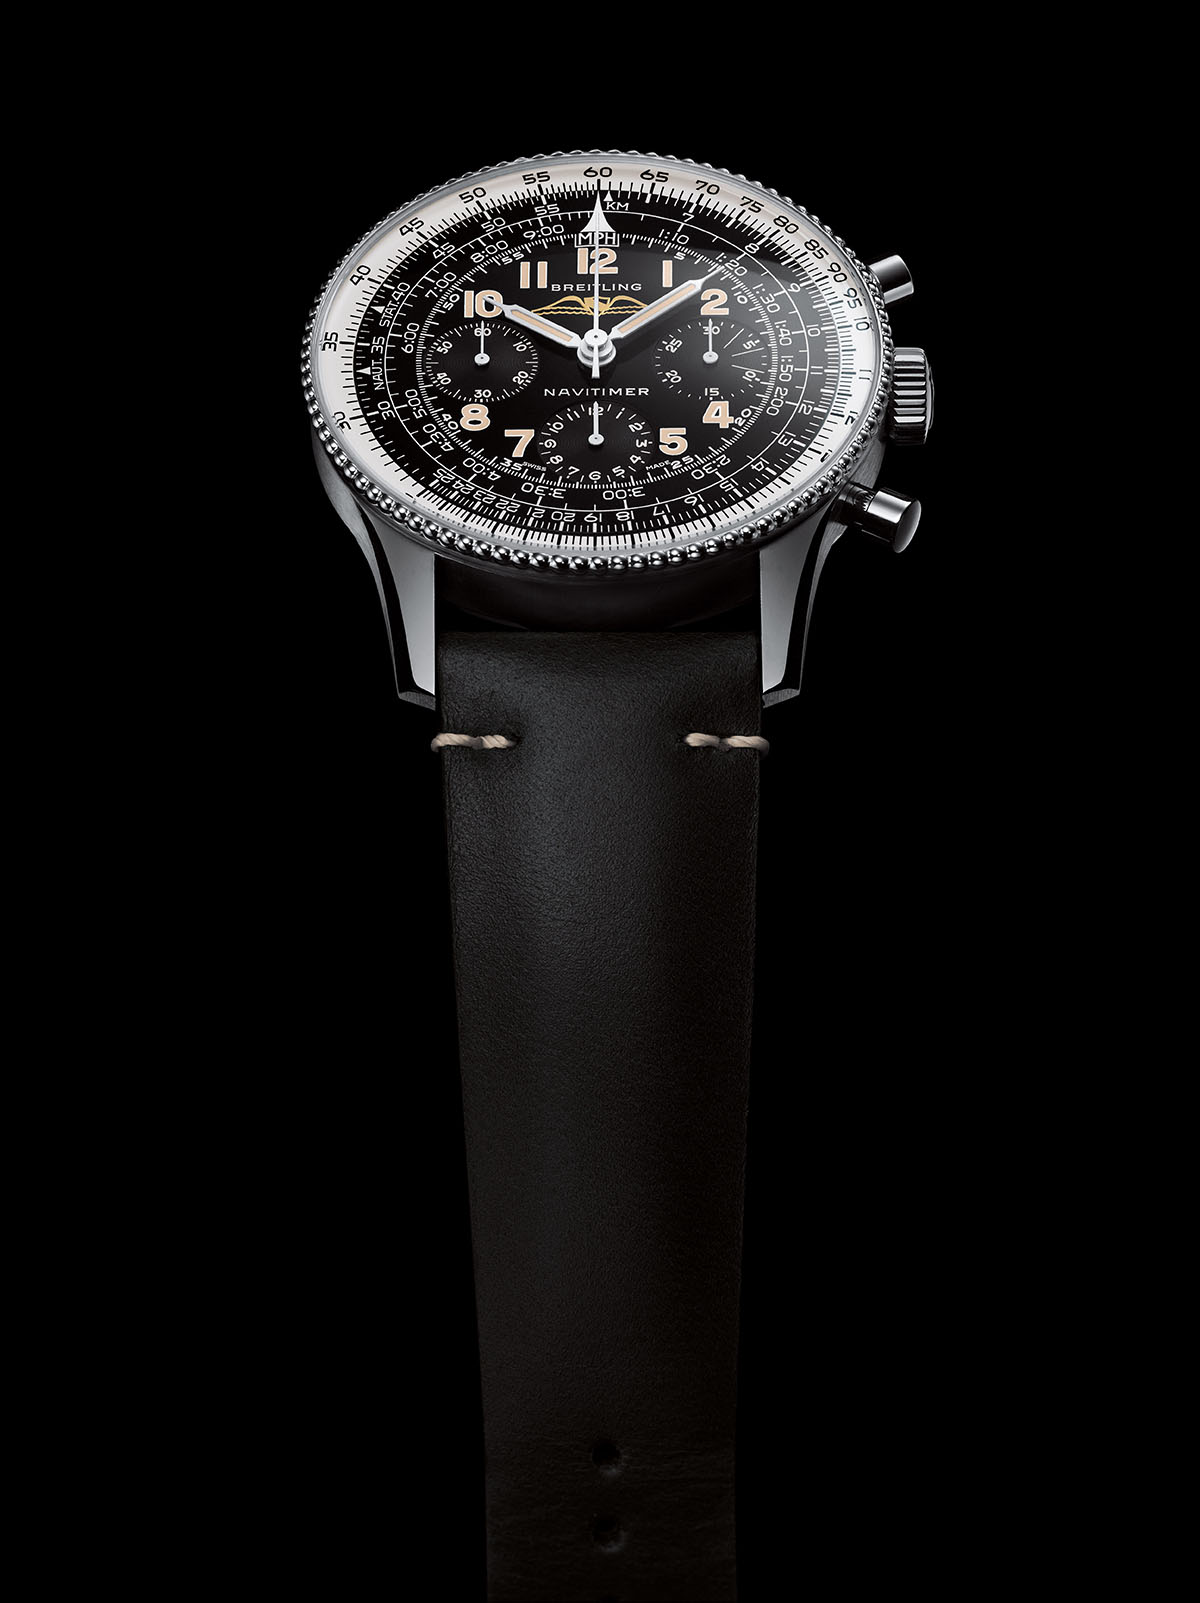 Breitling Navitimer 1959 RE Edition frontal fx